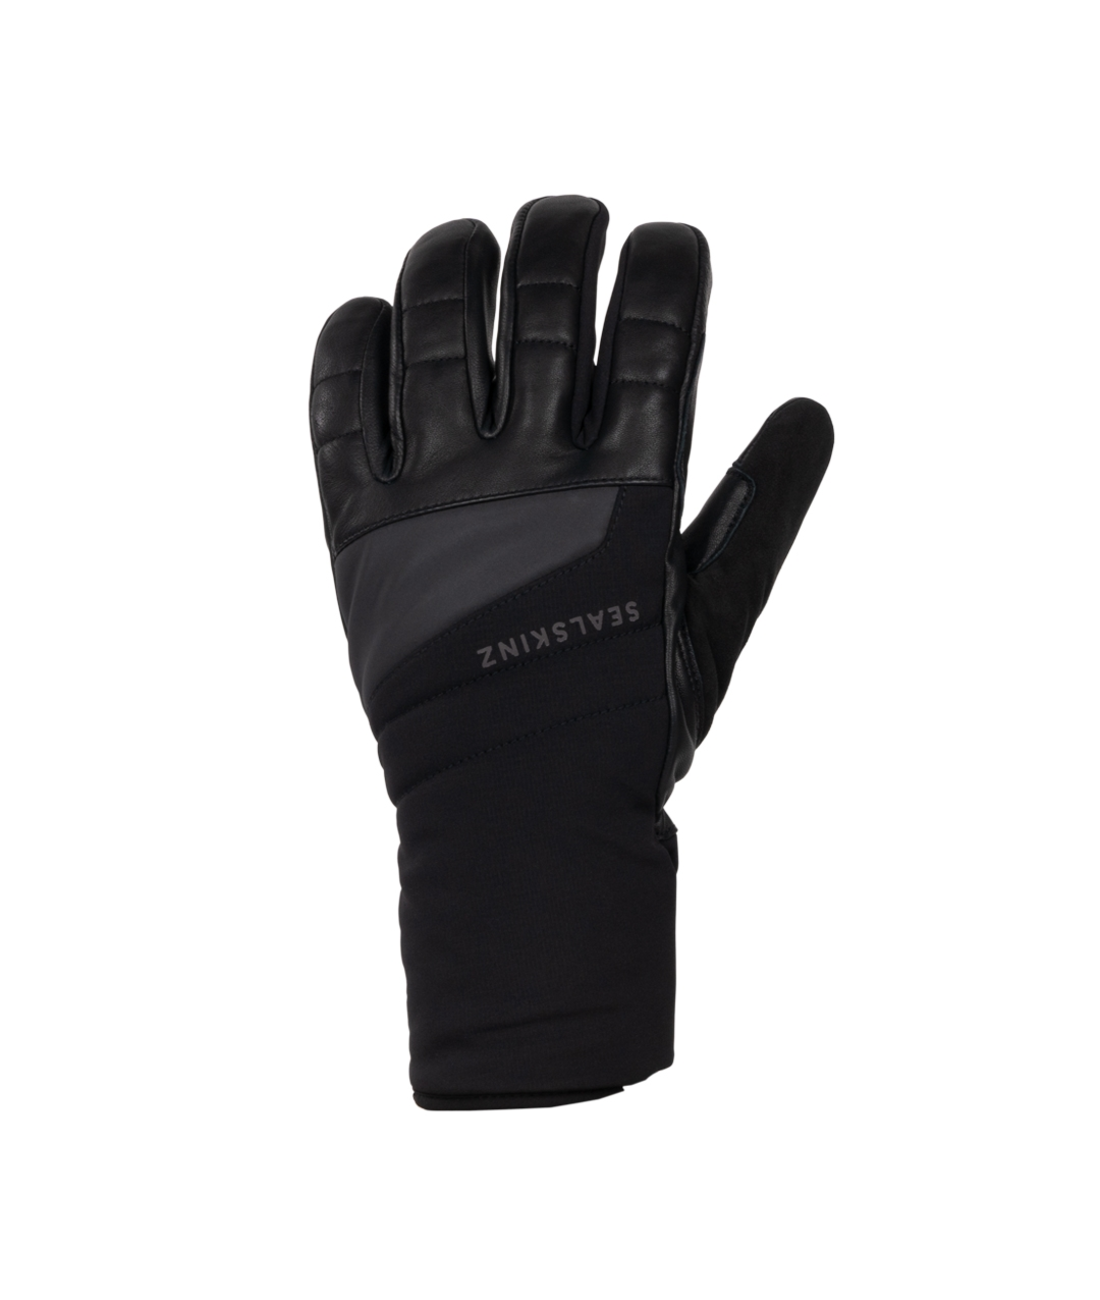 Waterproof Extreme Cold Weather Insulated Gauntlet mit Fusion Control